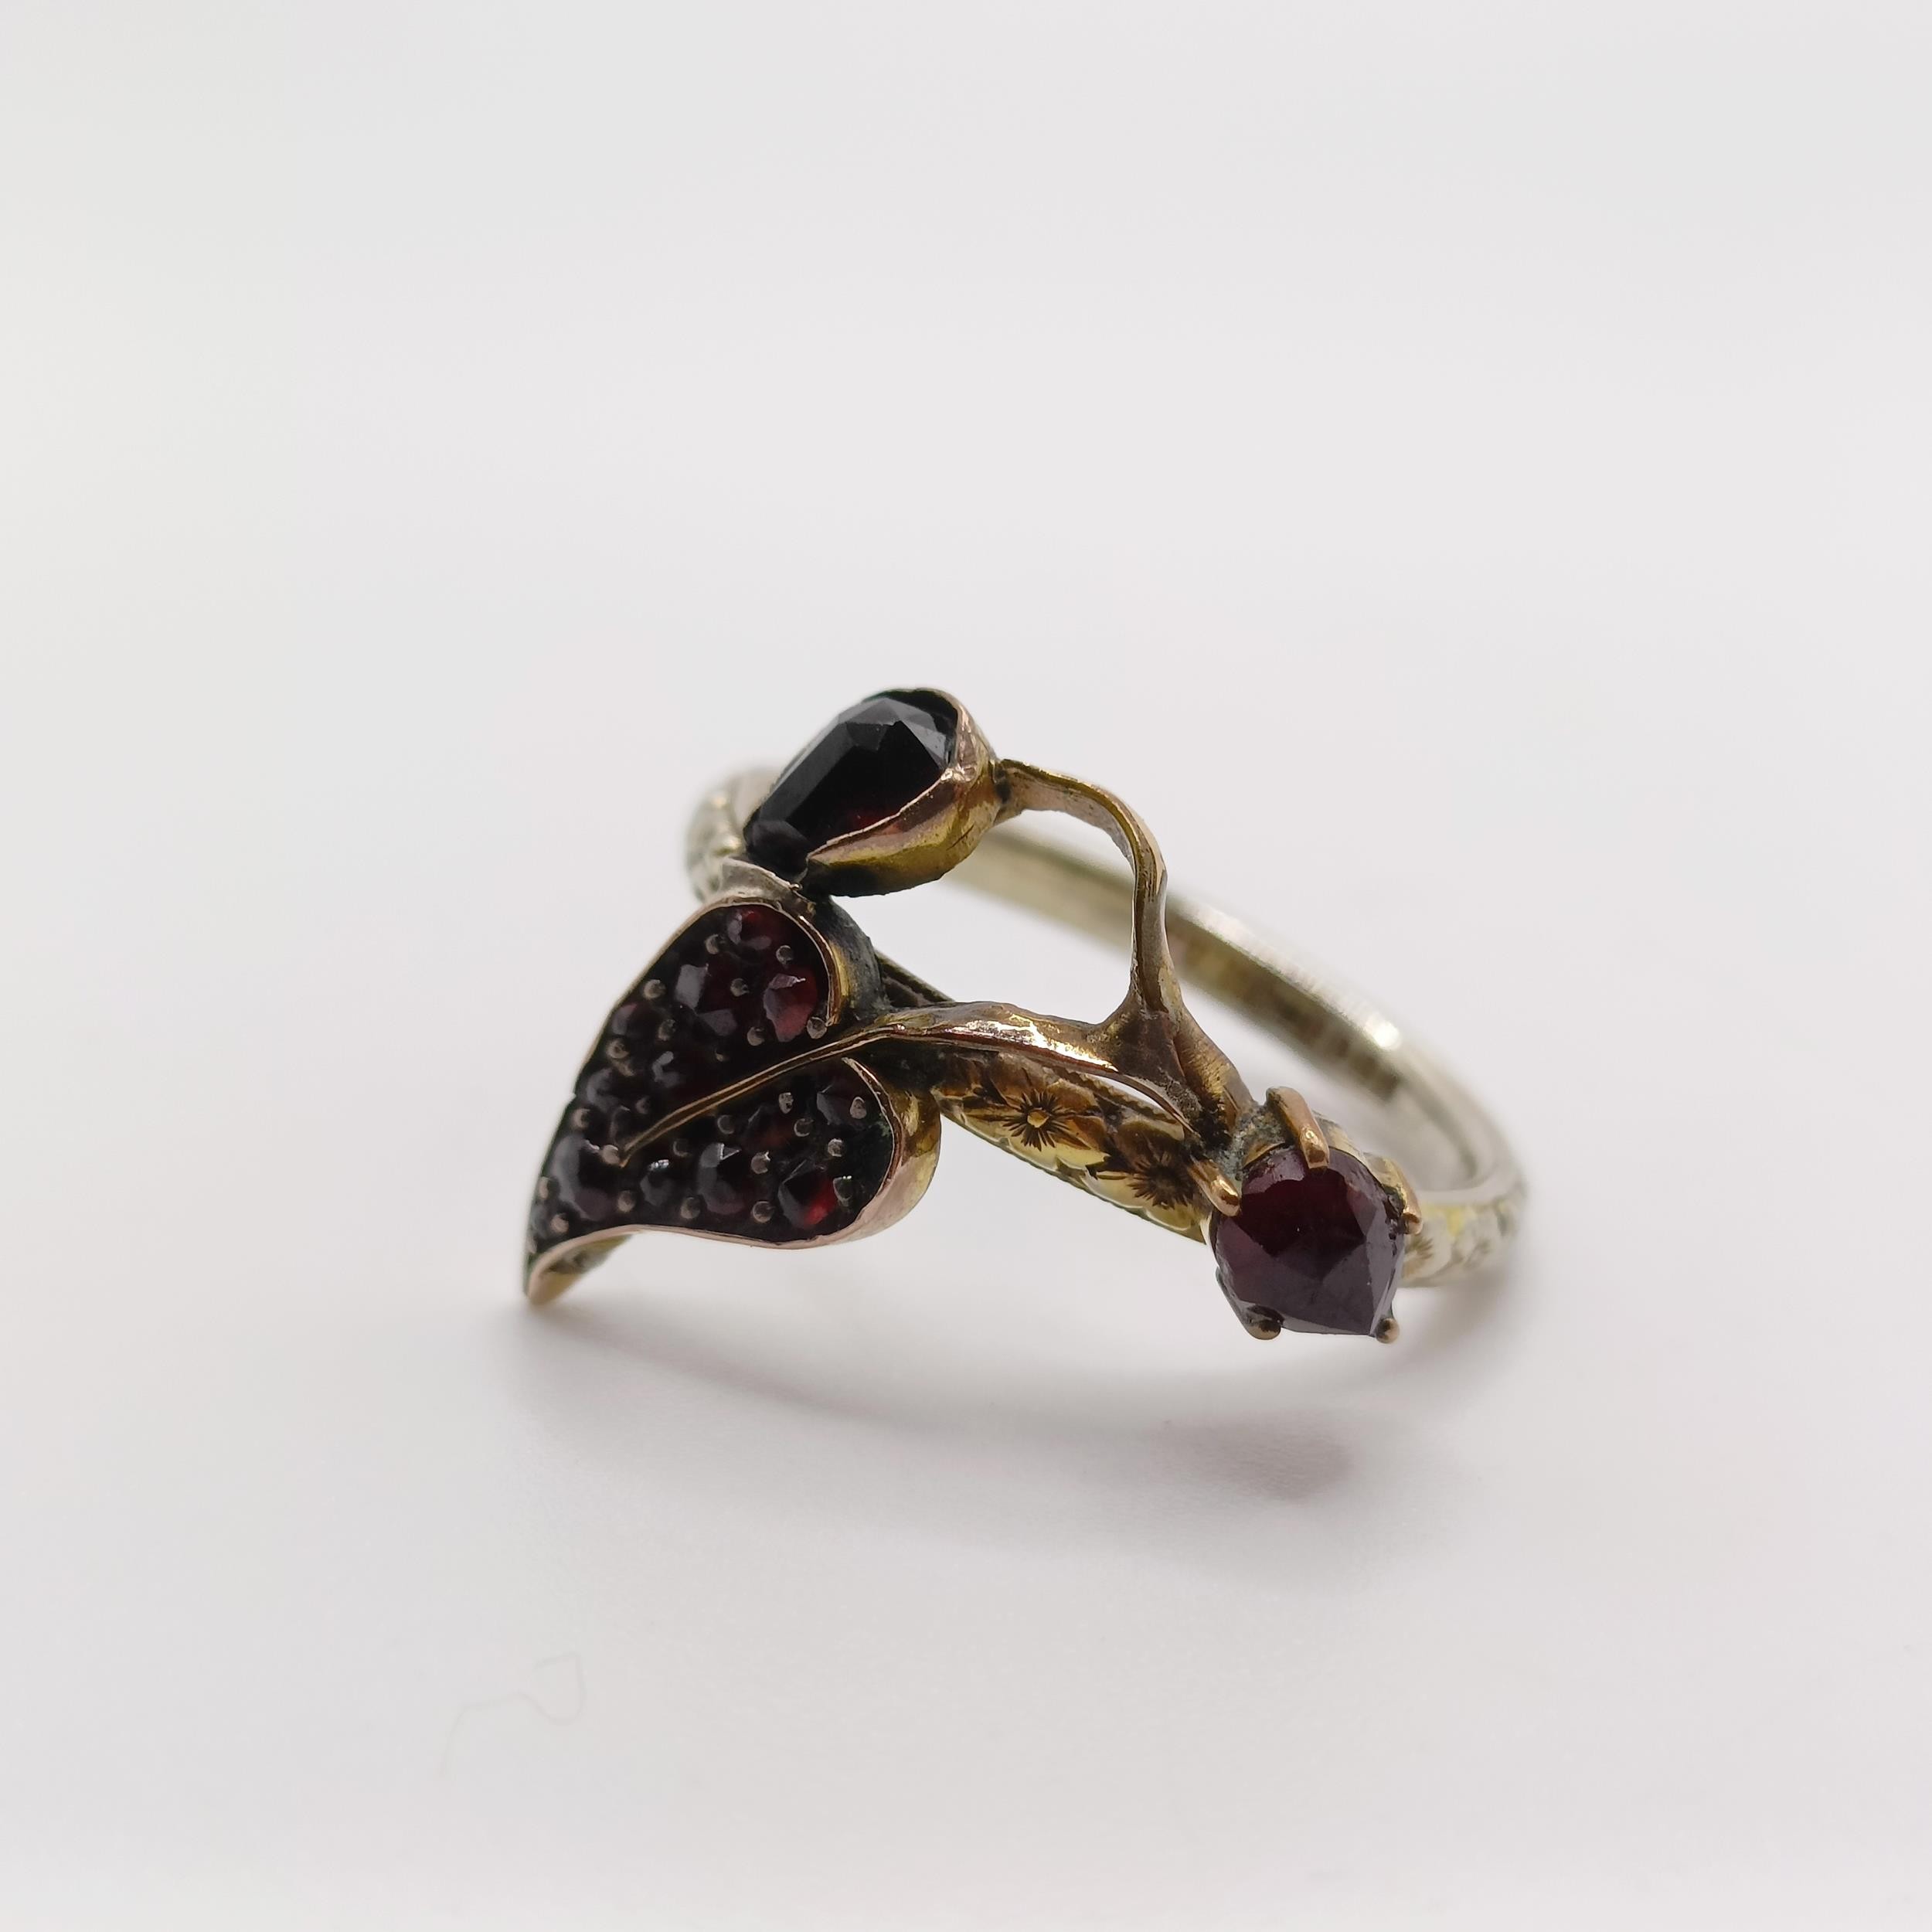 A platinum wedding band, ring size K, and a 18ct gold wedding band, with a garnet mount added, - Image 2 of 7